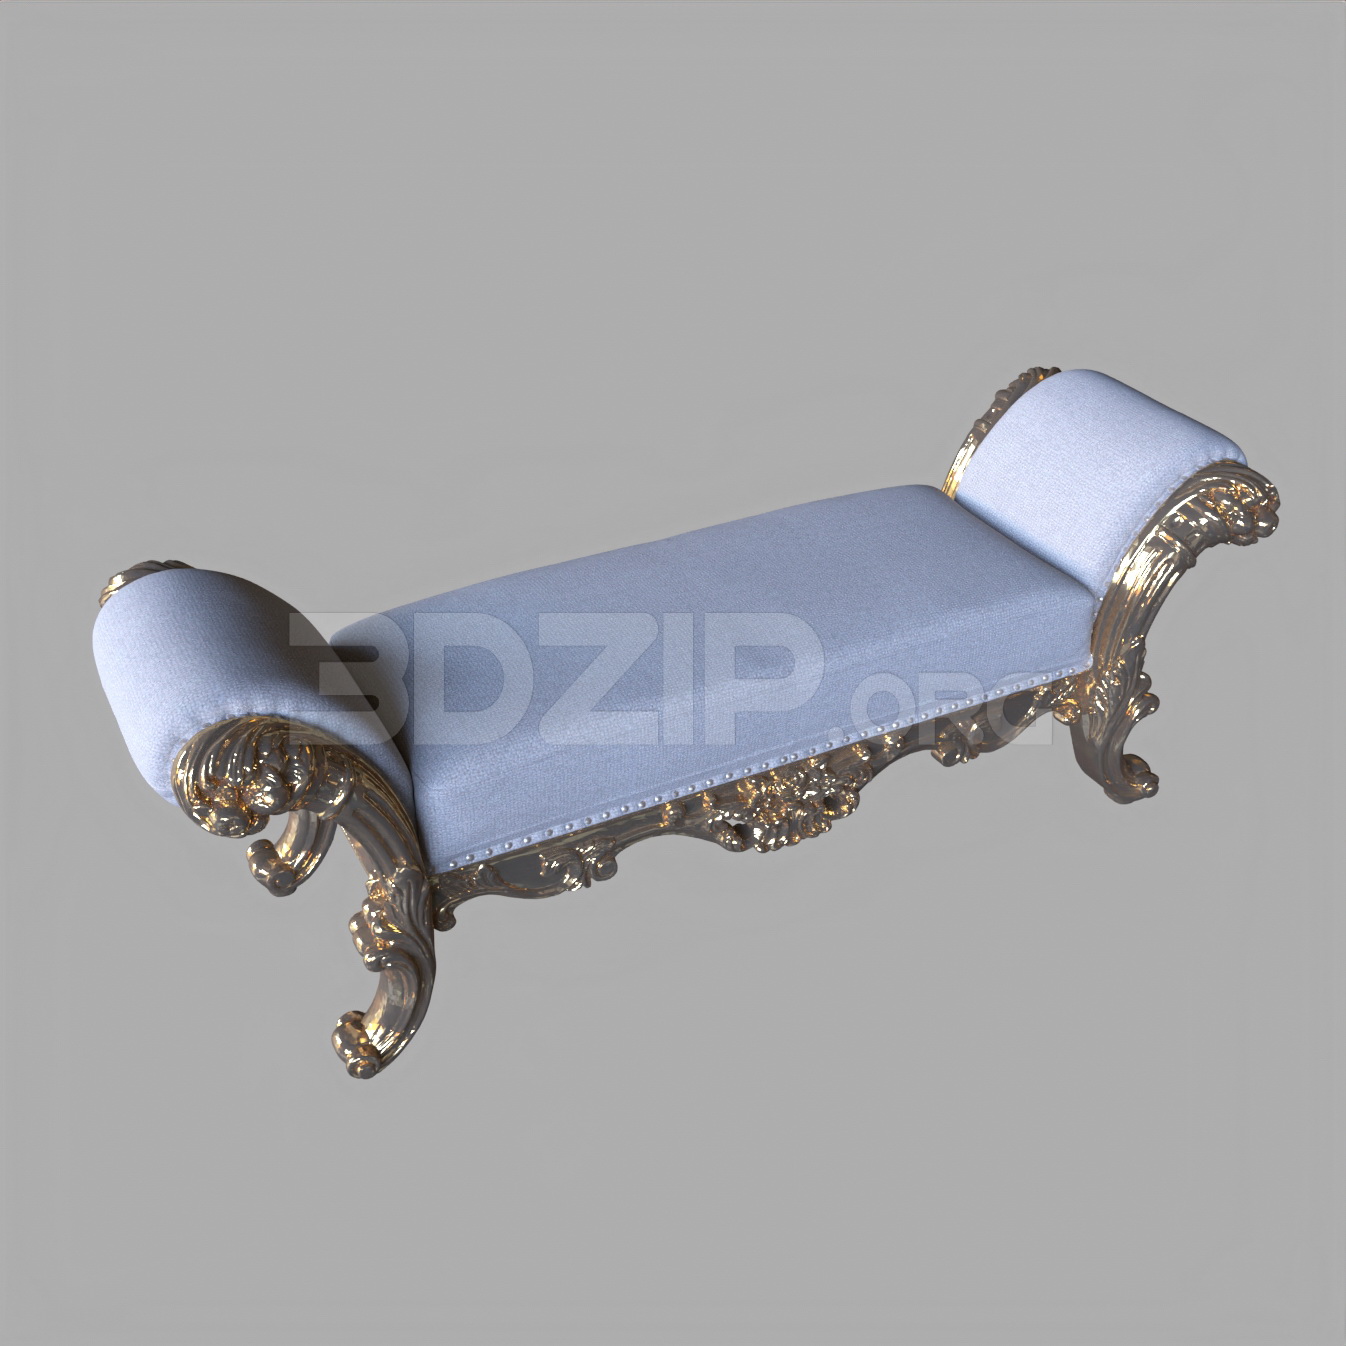 10803. Download Free Armchair Model By Le Tai Linh